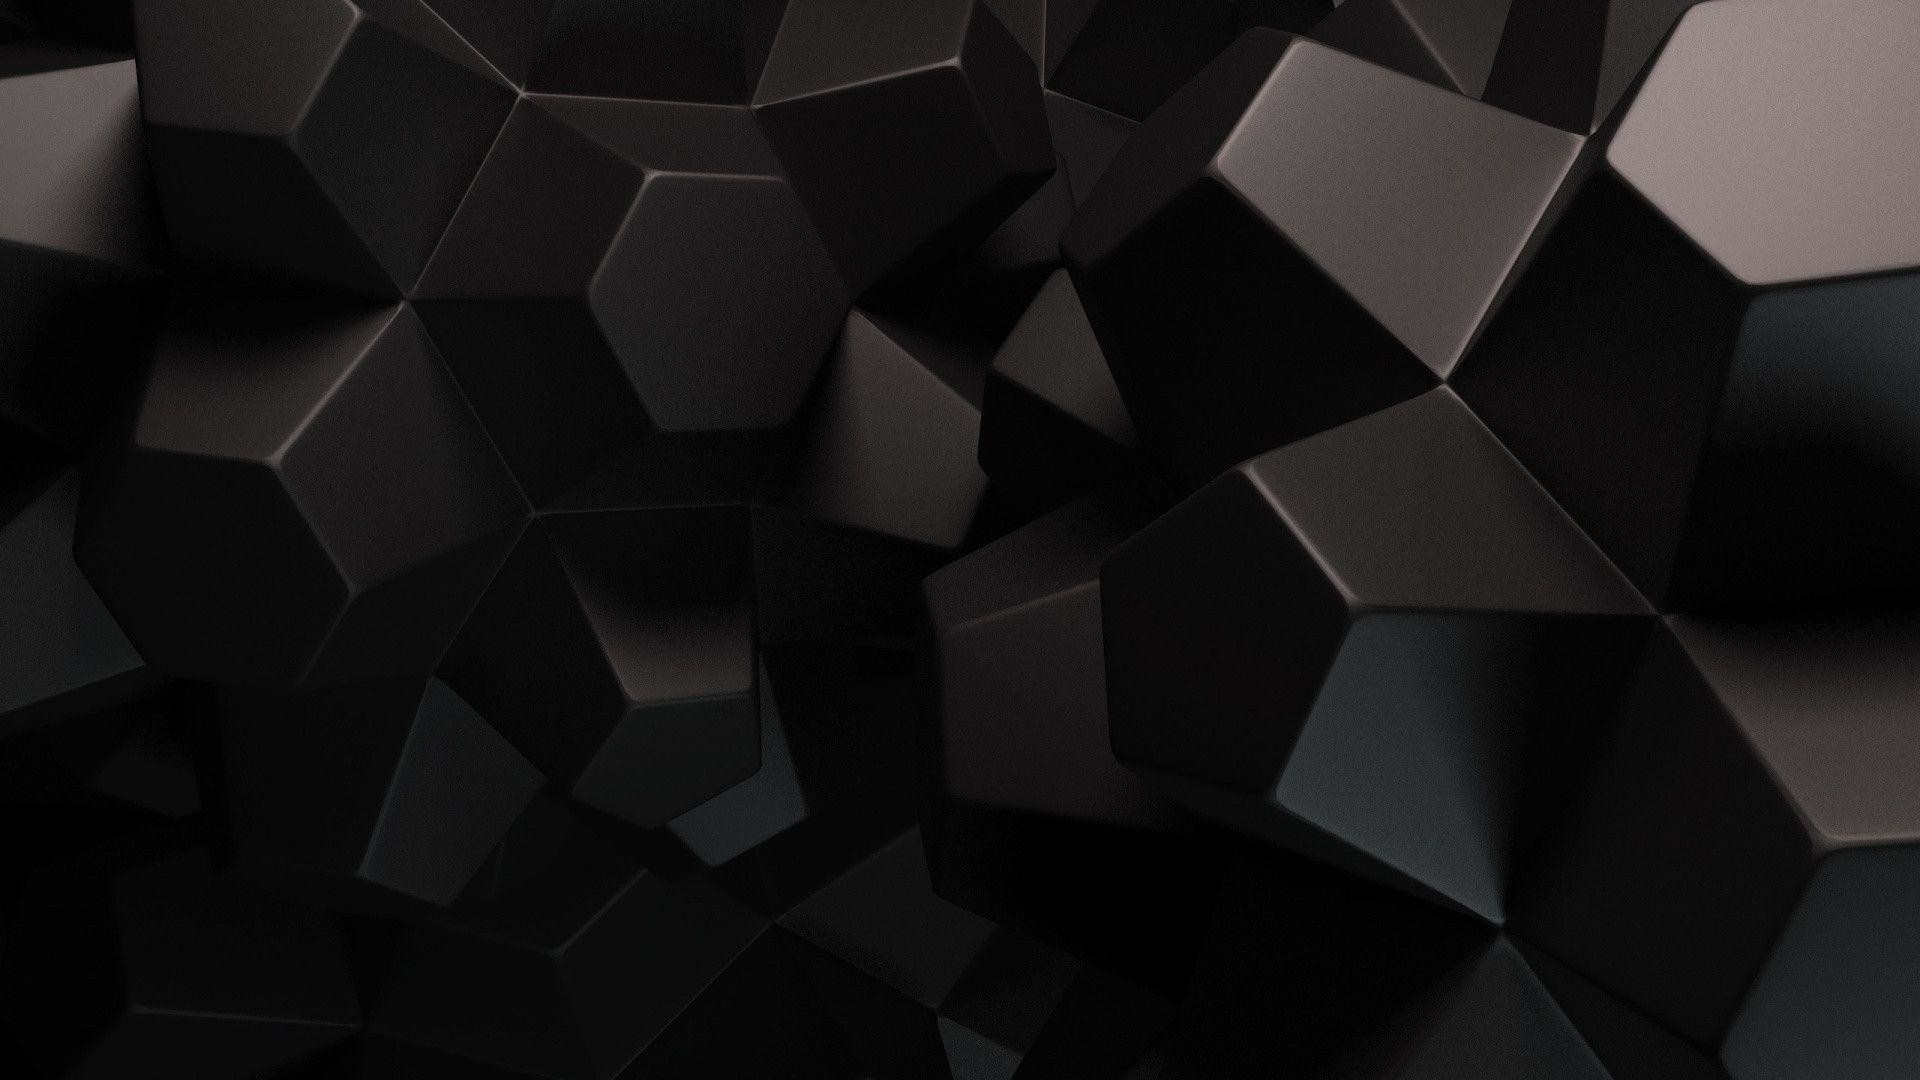 1920x1080 Black Abstract Wallpaper 1920X1080 Hd Images 3 HD Wallpapers | lzamgs.